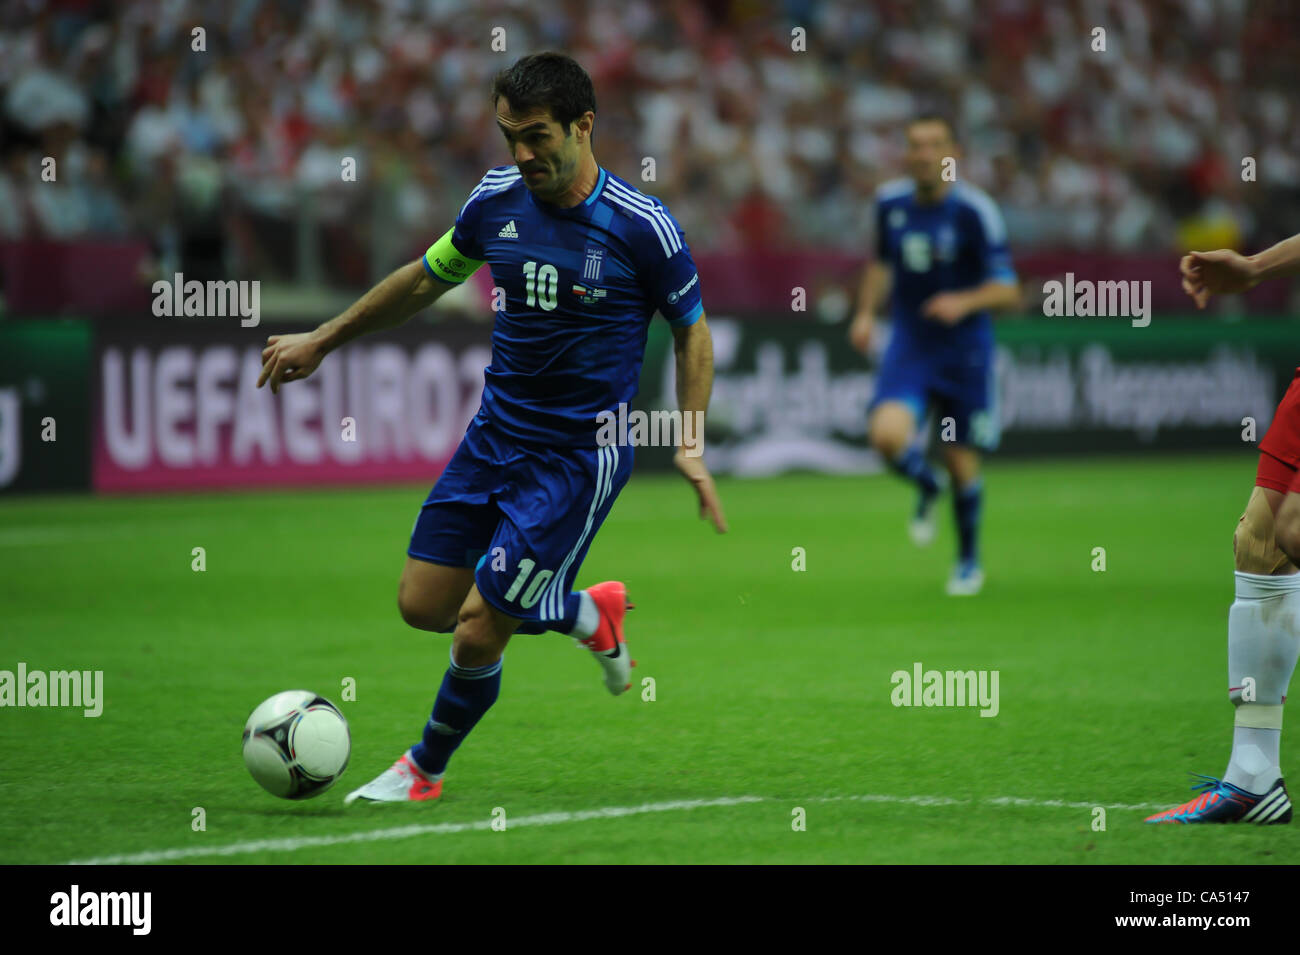 08.06.2012 Warsaw, Poland. Giorgos Karagounis (Panathinaikos FC) in action for Greece during the European Championship Group A game between Poland and Greece from the National Stadium. Stock Photo